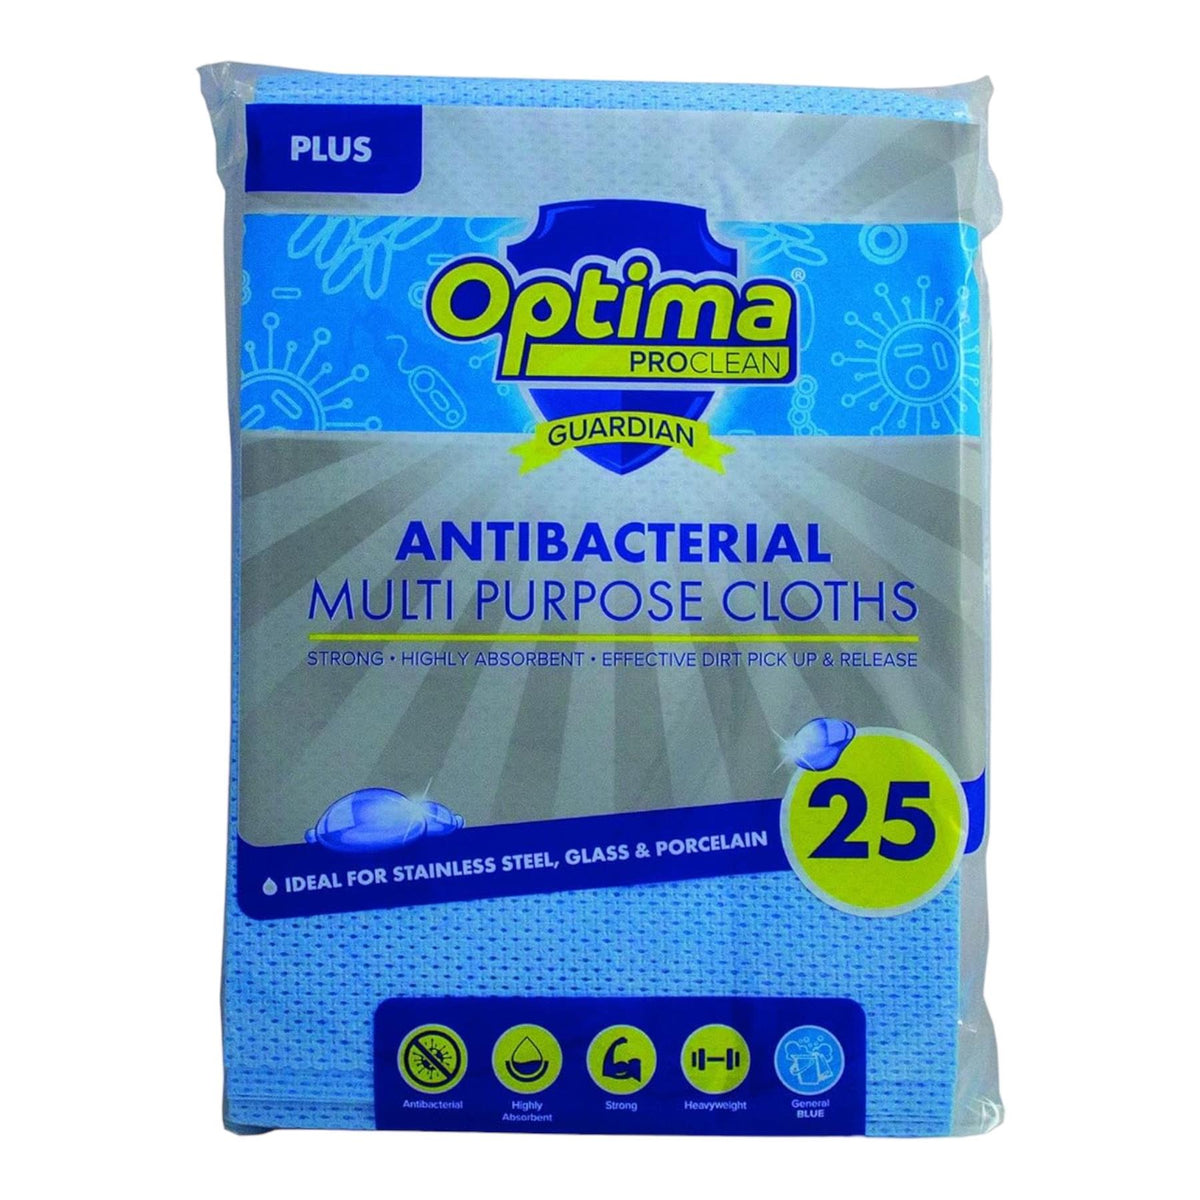 Optima Proclean Semi-Disposable Multi-Purpose Cleaning Cloths, Blue, Pack of 25